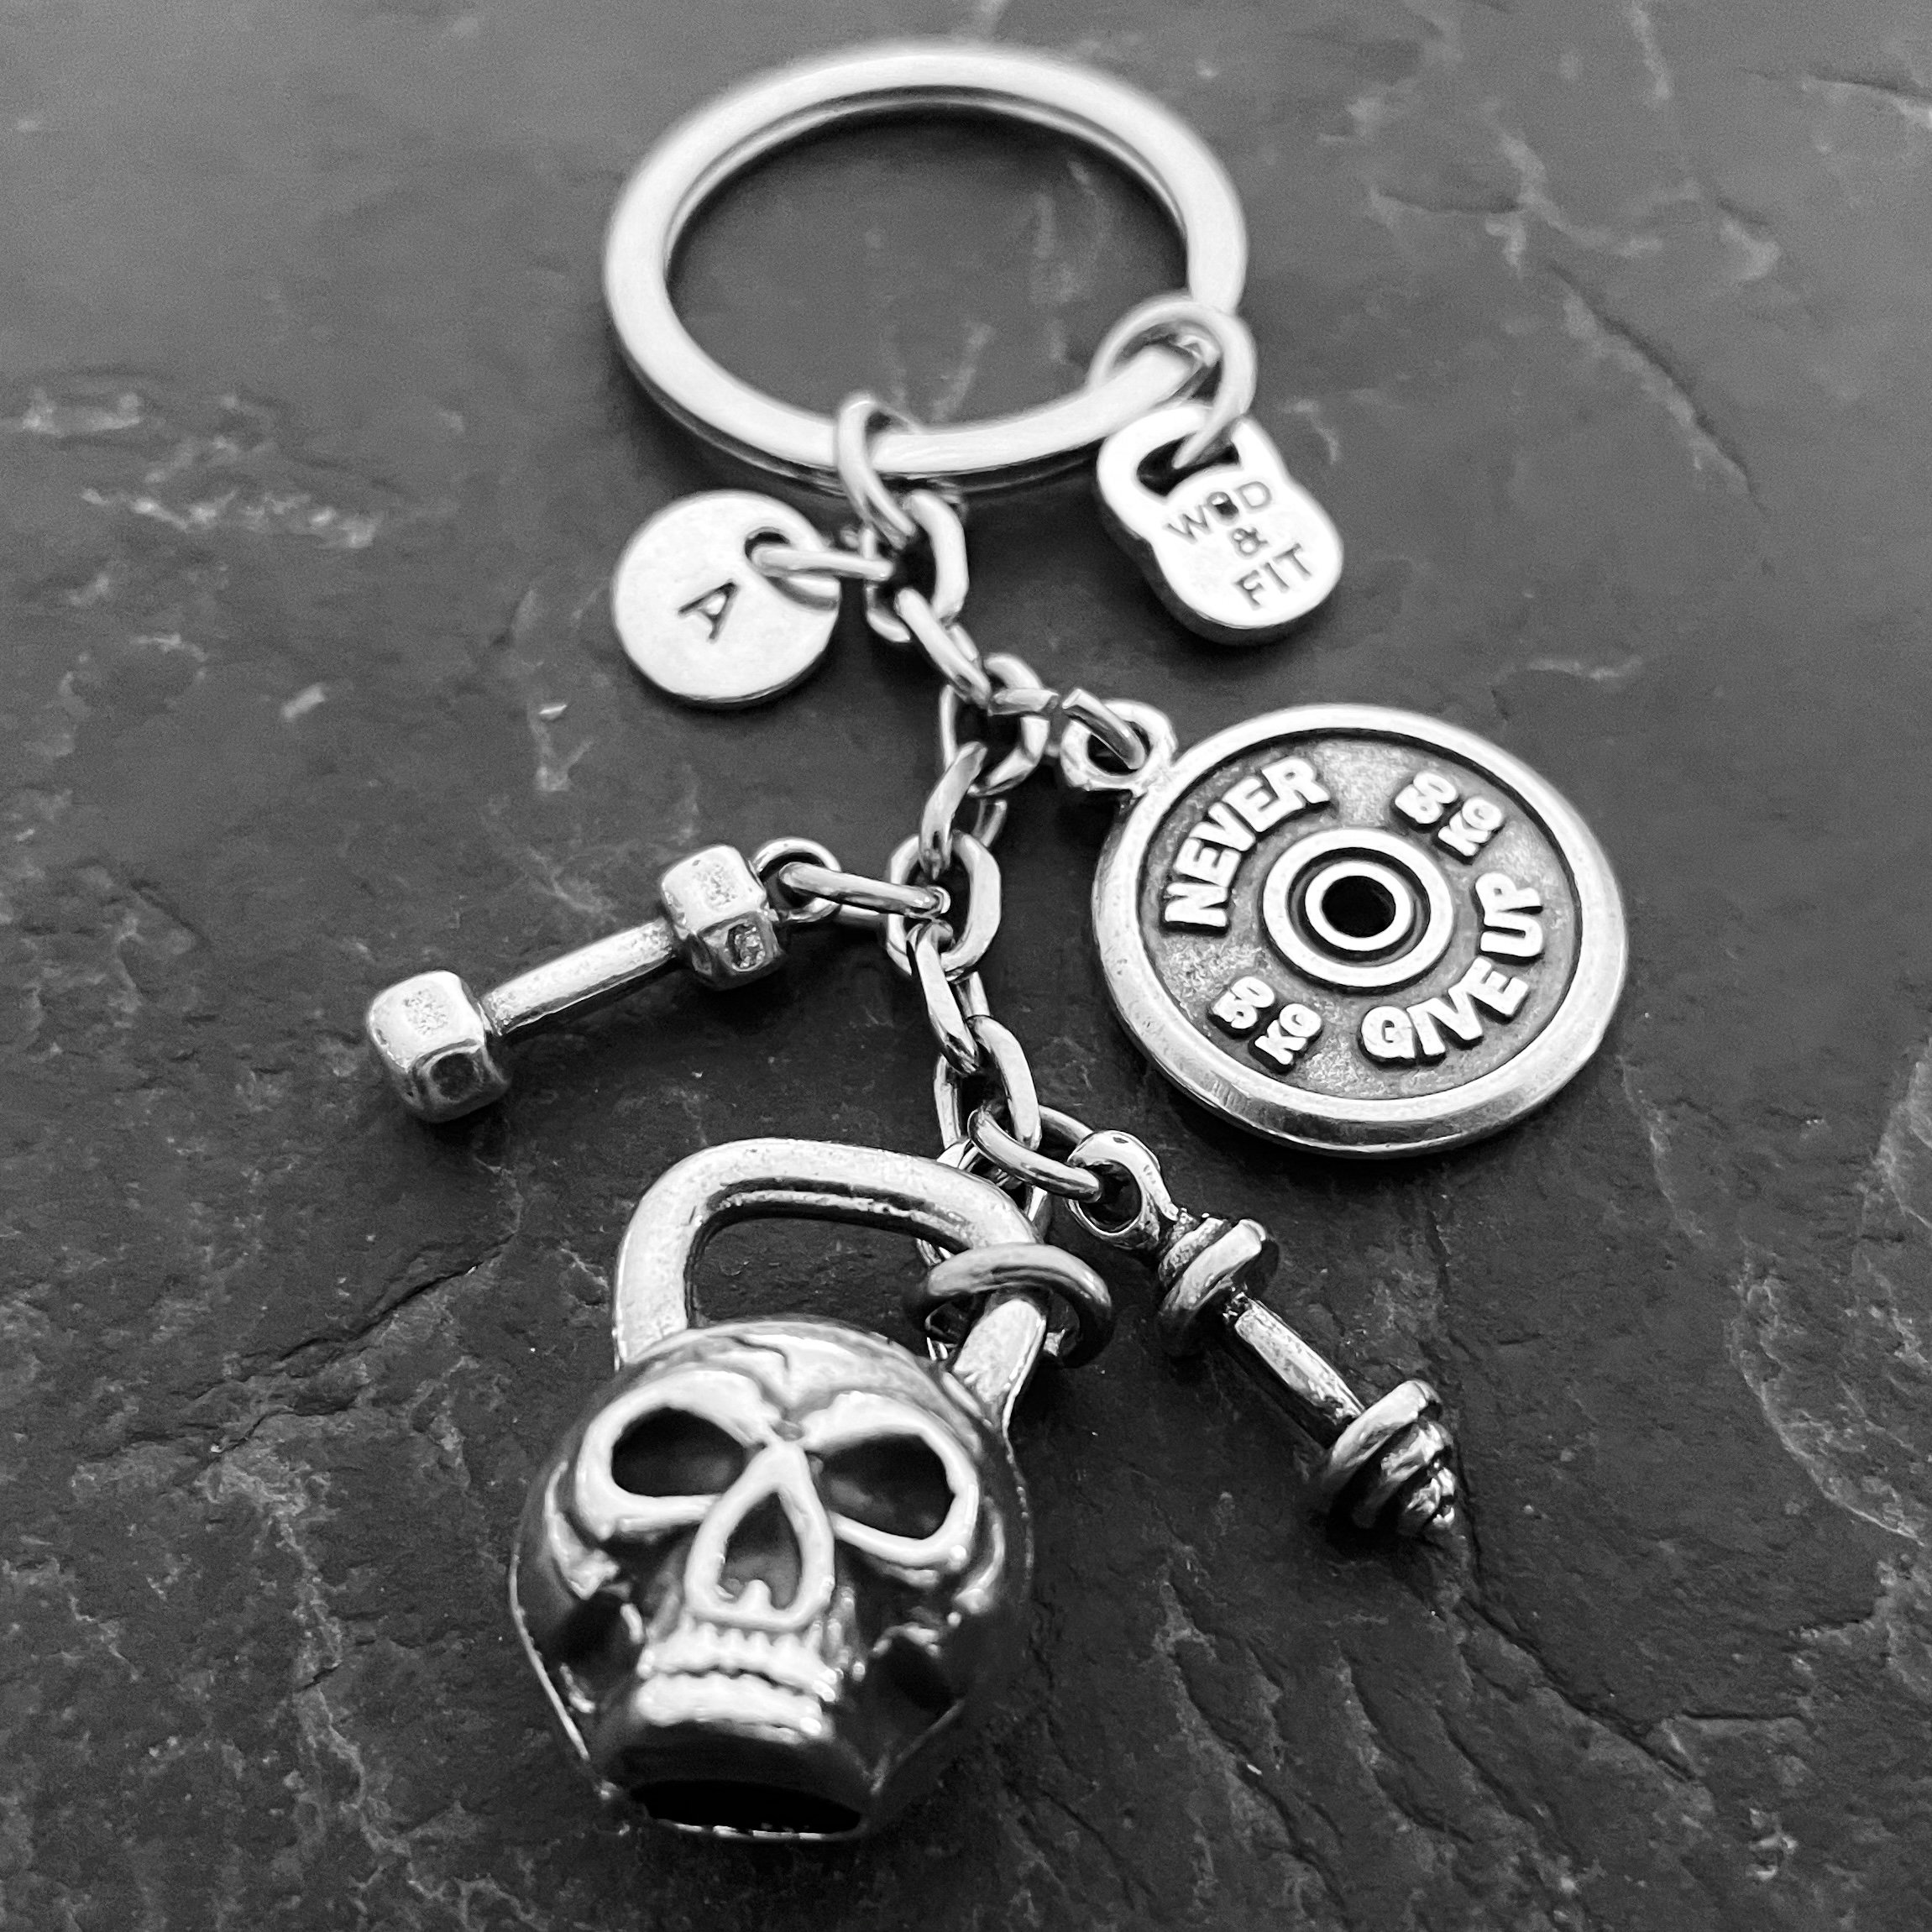 10pcs Gym Keychain Killer Workout Gifts CUSTOM Gifts Bodybuilding Gift  Motivation Skulls Gym Gifts Weightlifting Fitness gifts